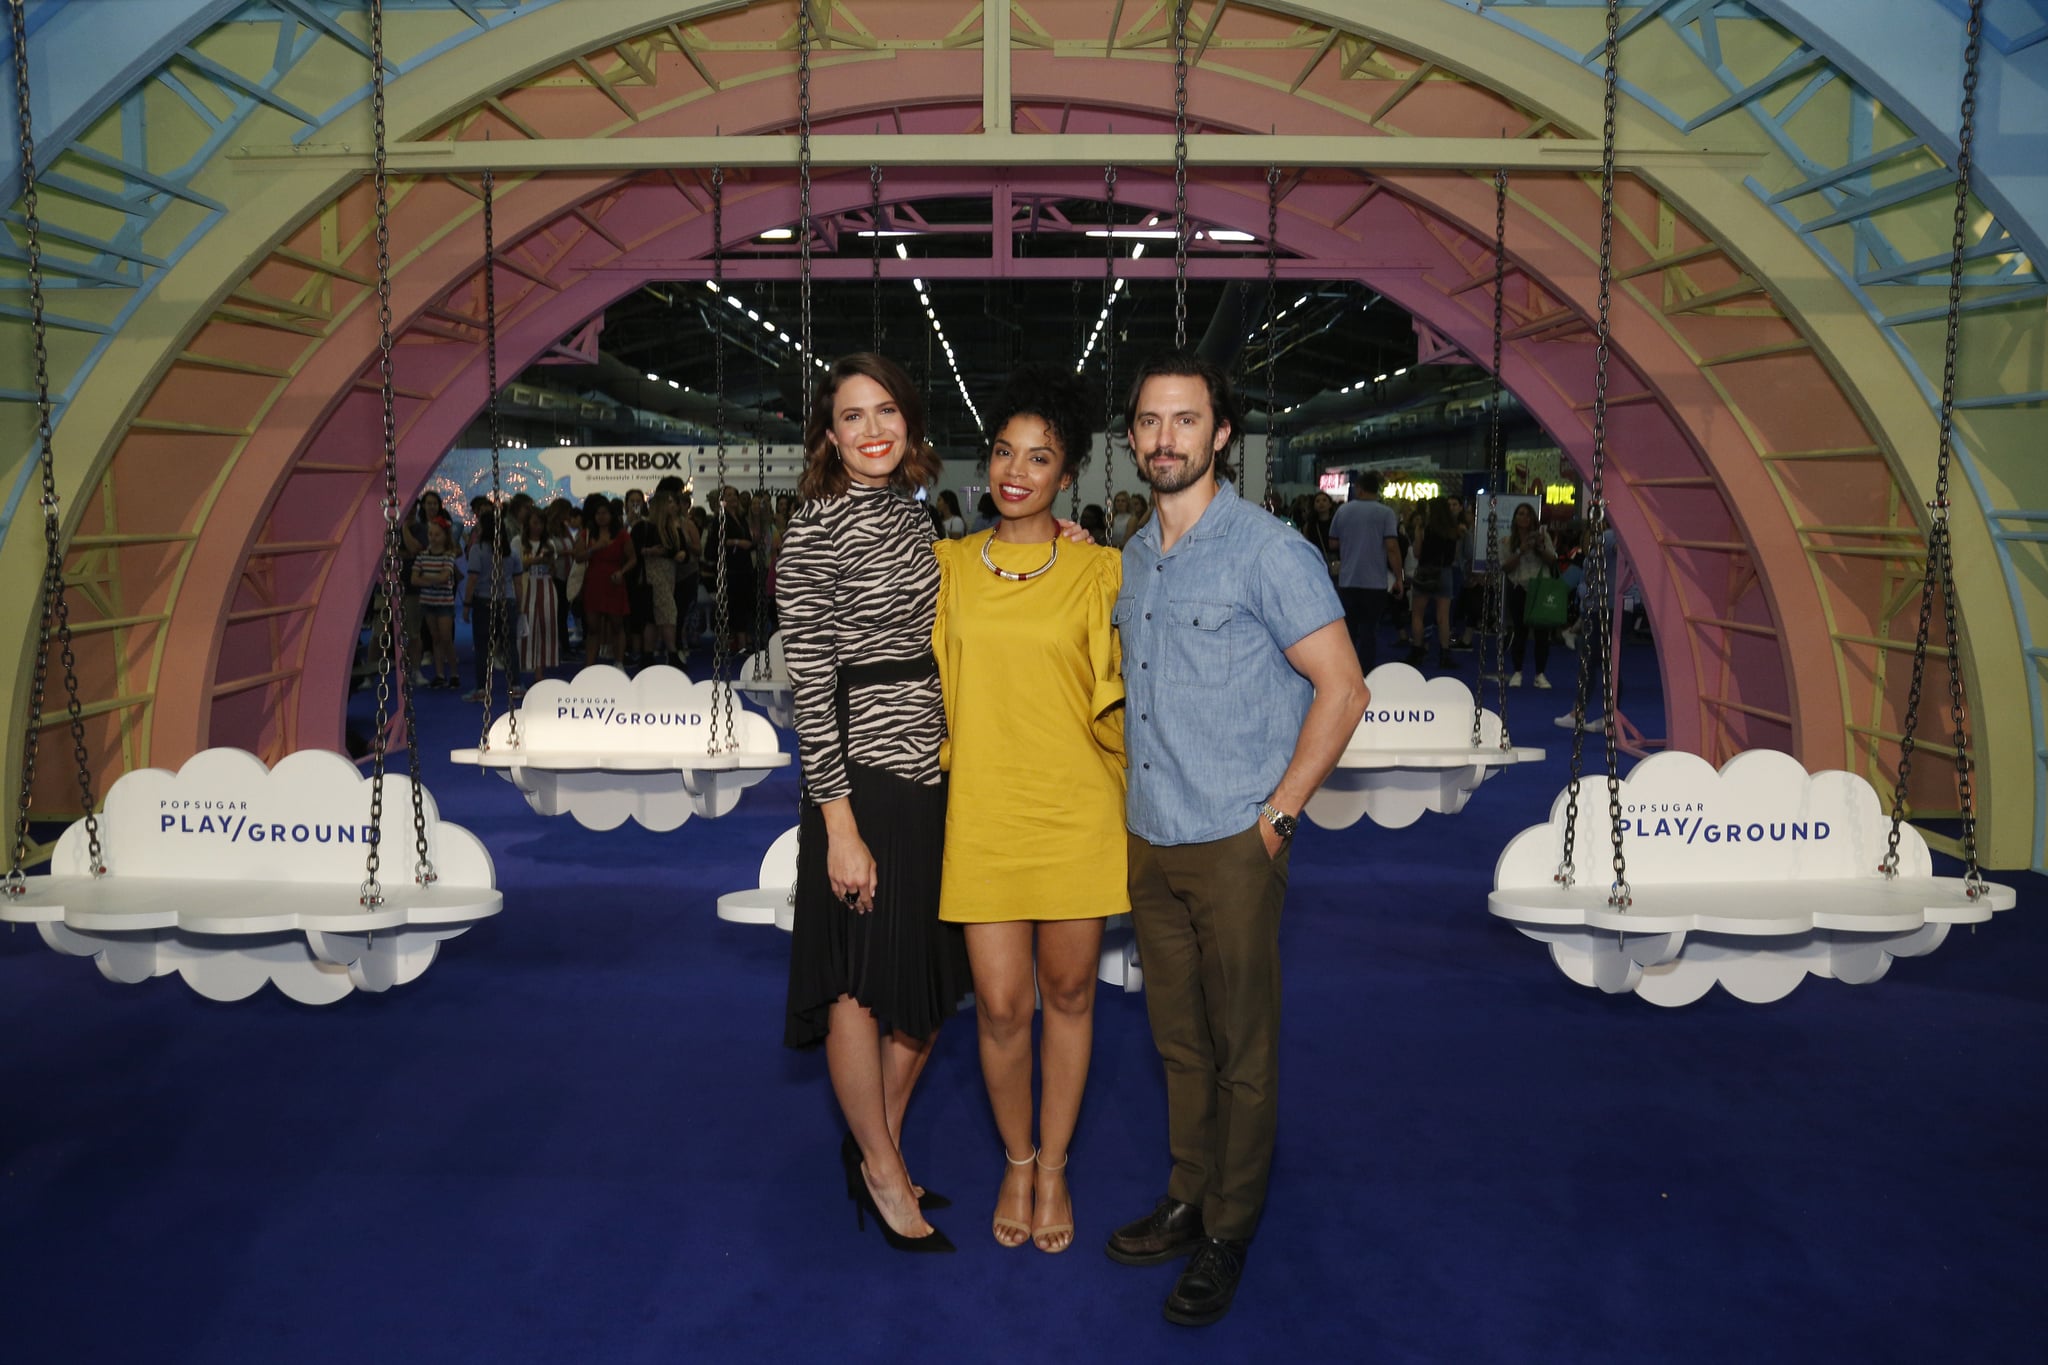 NEW YORK, NEW YORK - JUNE 22: Amanda Seyfried, Milo Ventimiglia and Mandy Moore attend the POPSUGAR Play/ground at Pier 94 on June 22, 2019 in New York City. (Photo by Lars Niki/Getty Images for POPSUGAR and Reed Exhibitions )